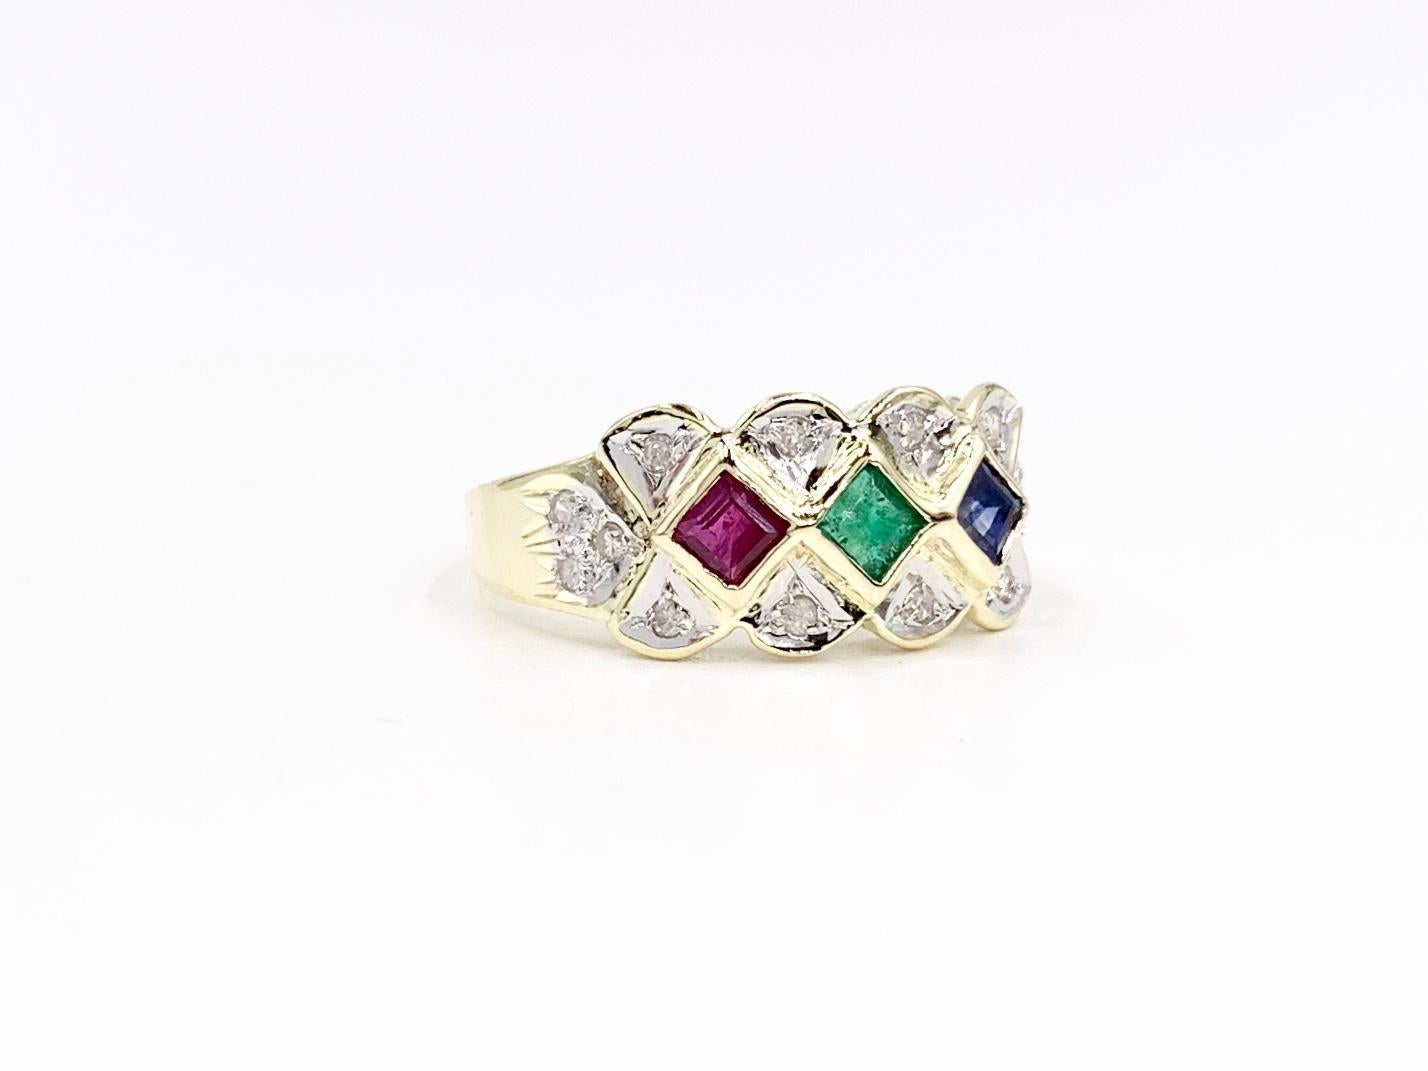 A comfortable and wearable 14 karat two tone gold ring featuring princess cut ruby, emerald and blue sapphire and accented with 14 single cut diamonds at approximately G color, I1 clarity.
Weights are as follows: Ruby .19 carats, Emerald .15 and